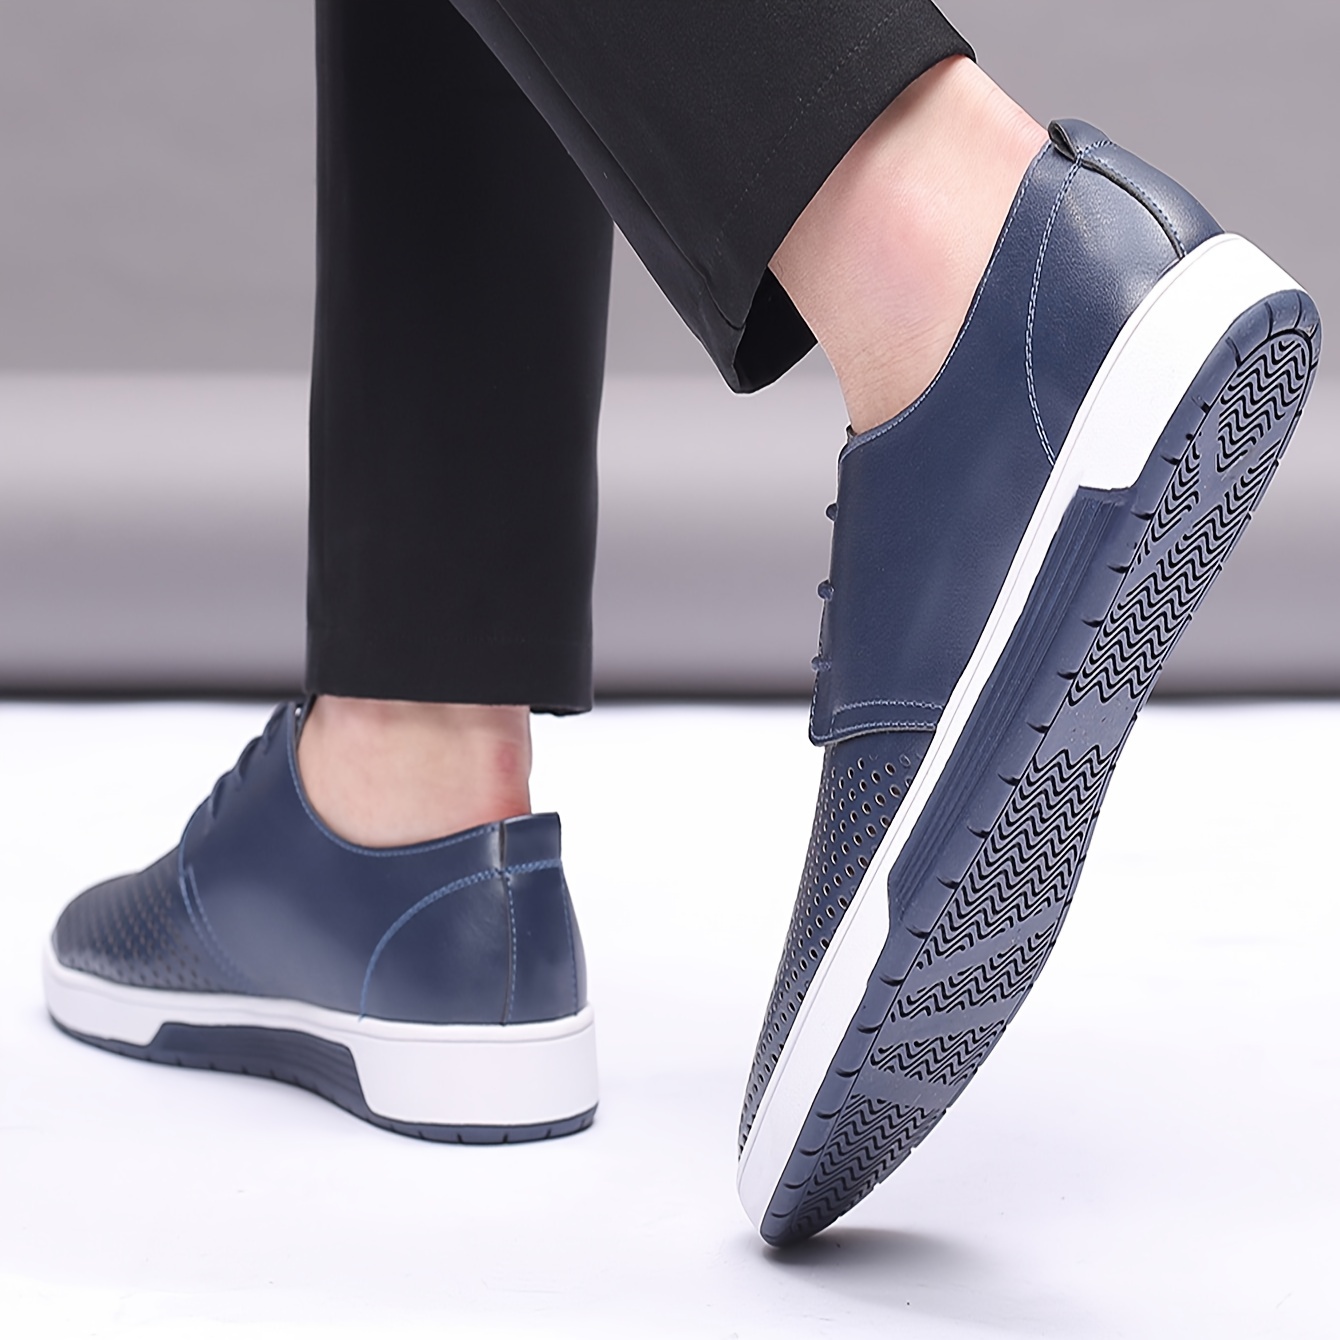 Out of Office 'For Walking' sneakers in black